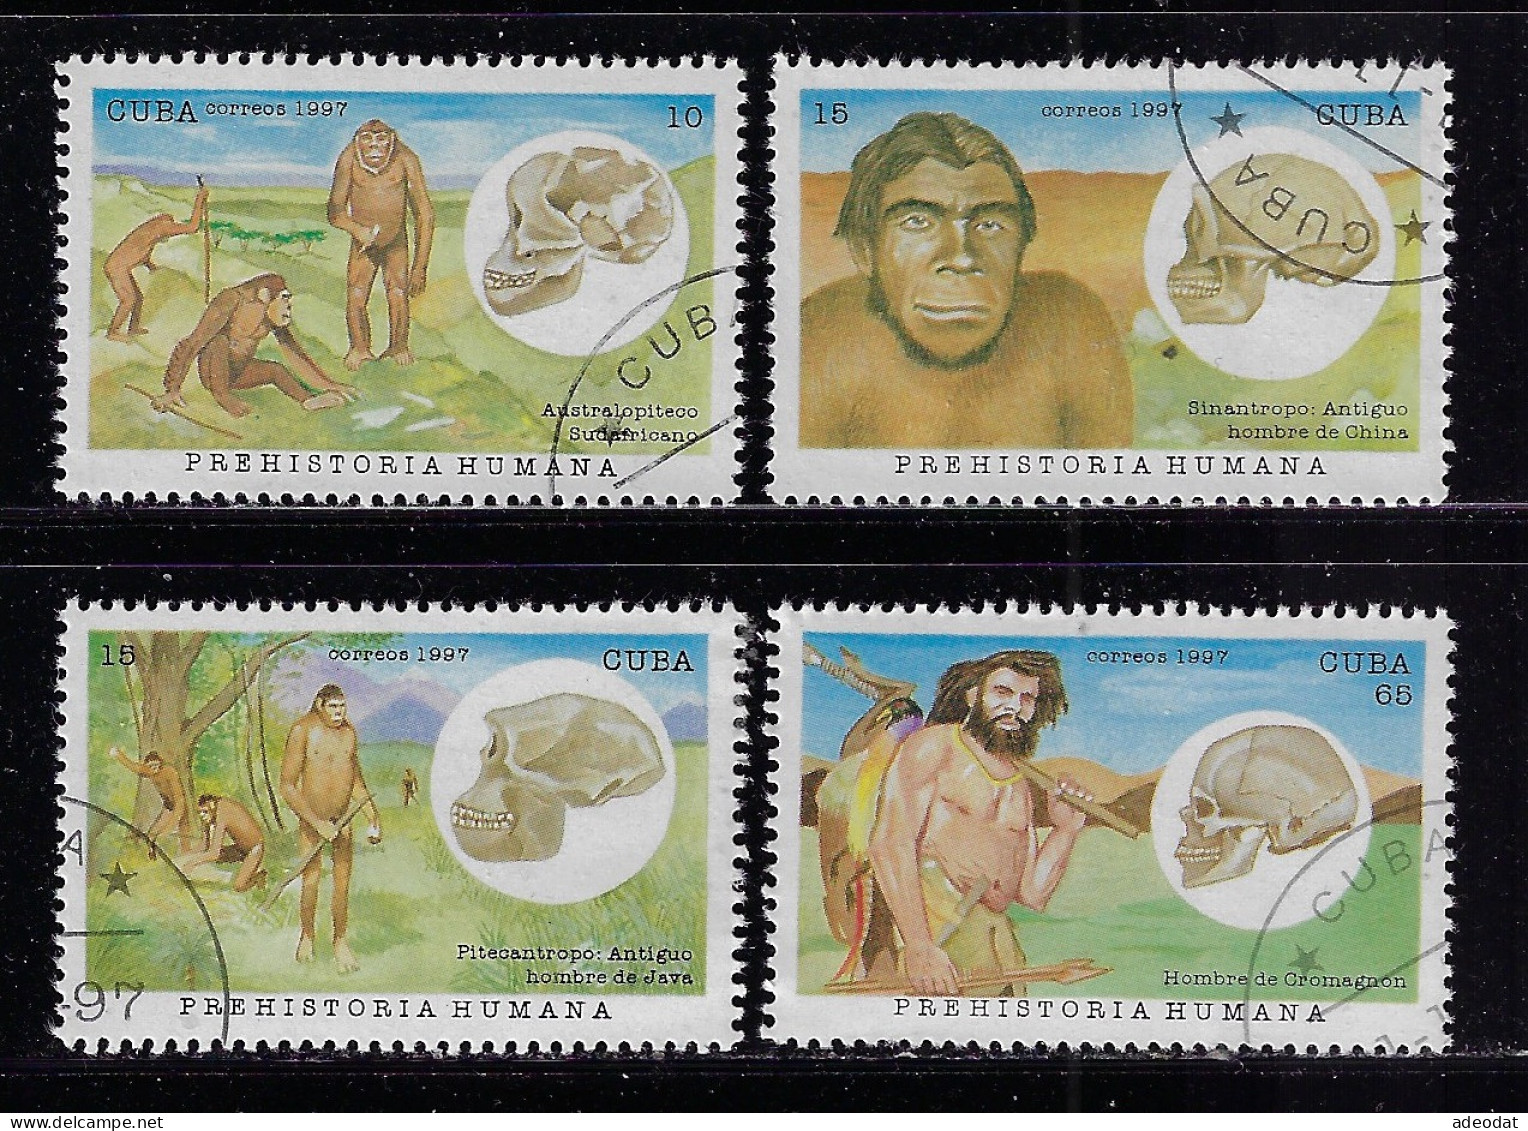 CUBA 1997 SCOTT 3877-3879,3881 CANCELLED - Used Stamps